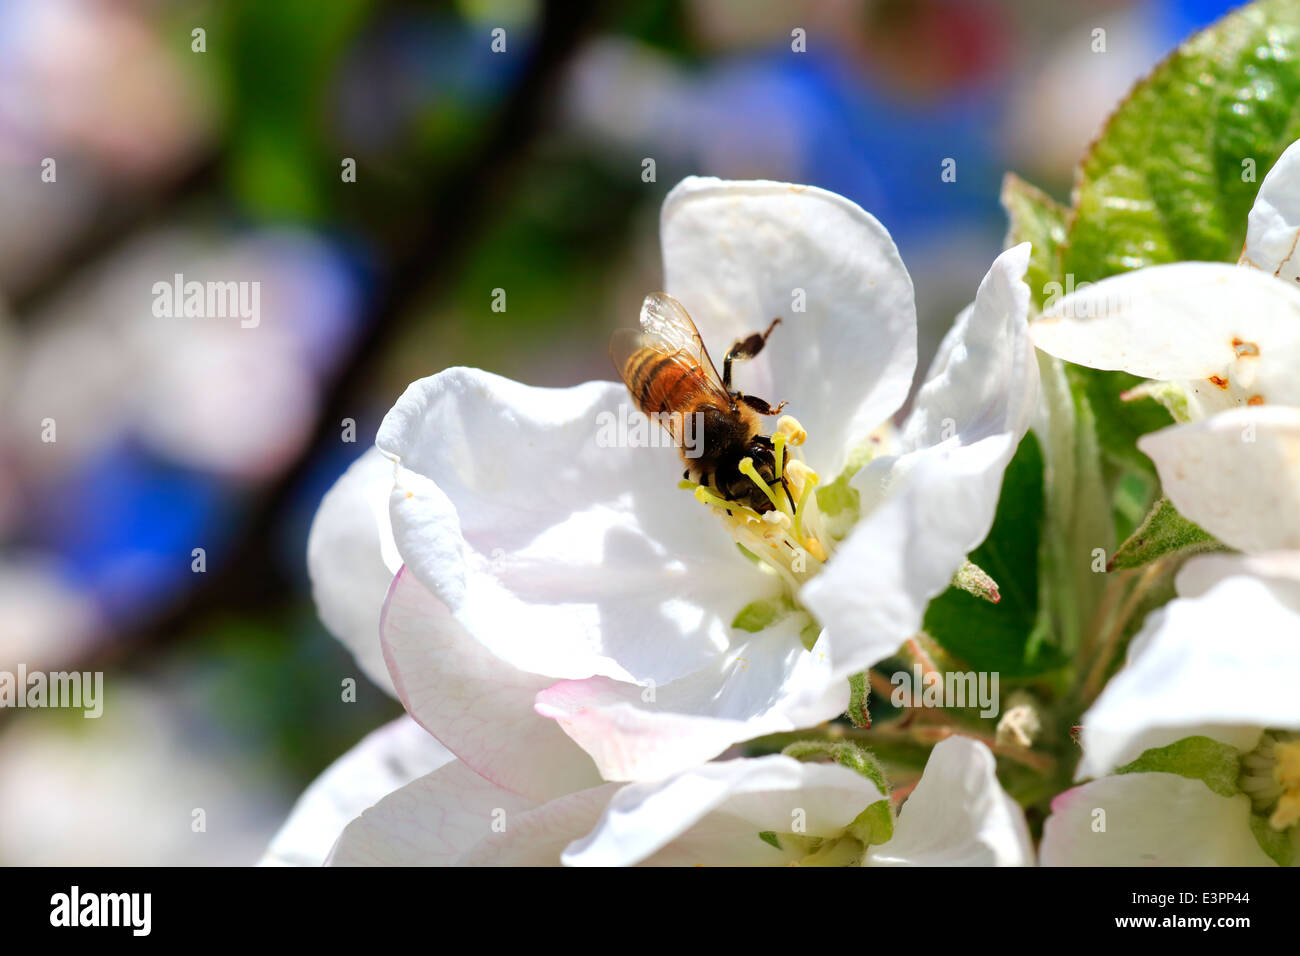 A honey bee pollinating and receiving nectar from an apple tree flower in the Annapolis Valley of Nova Scotia, Canada Stock Photo